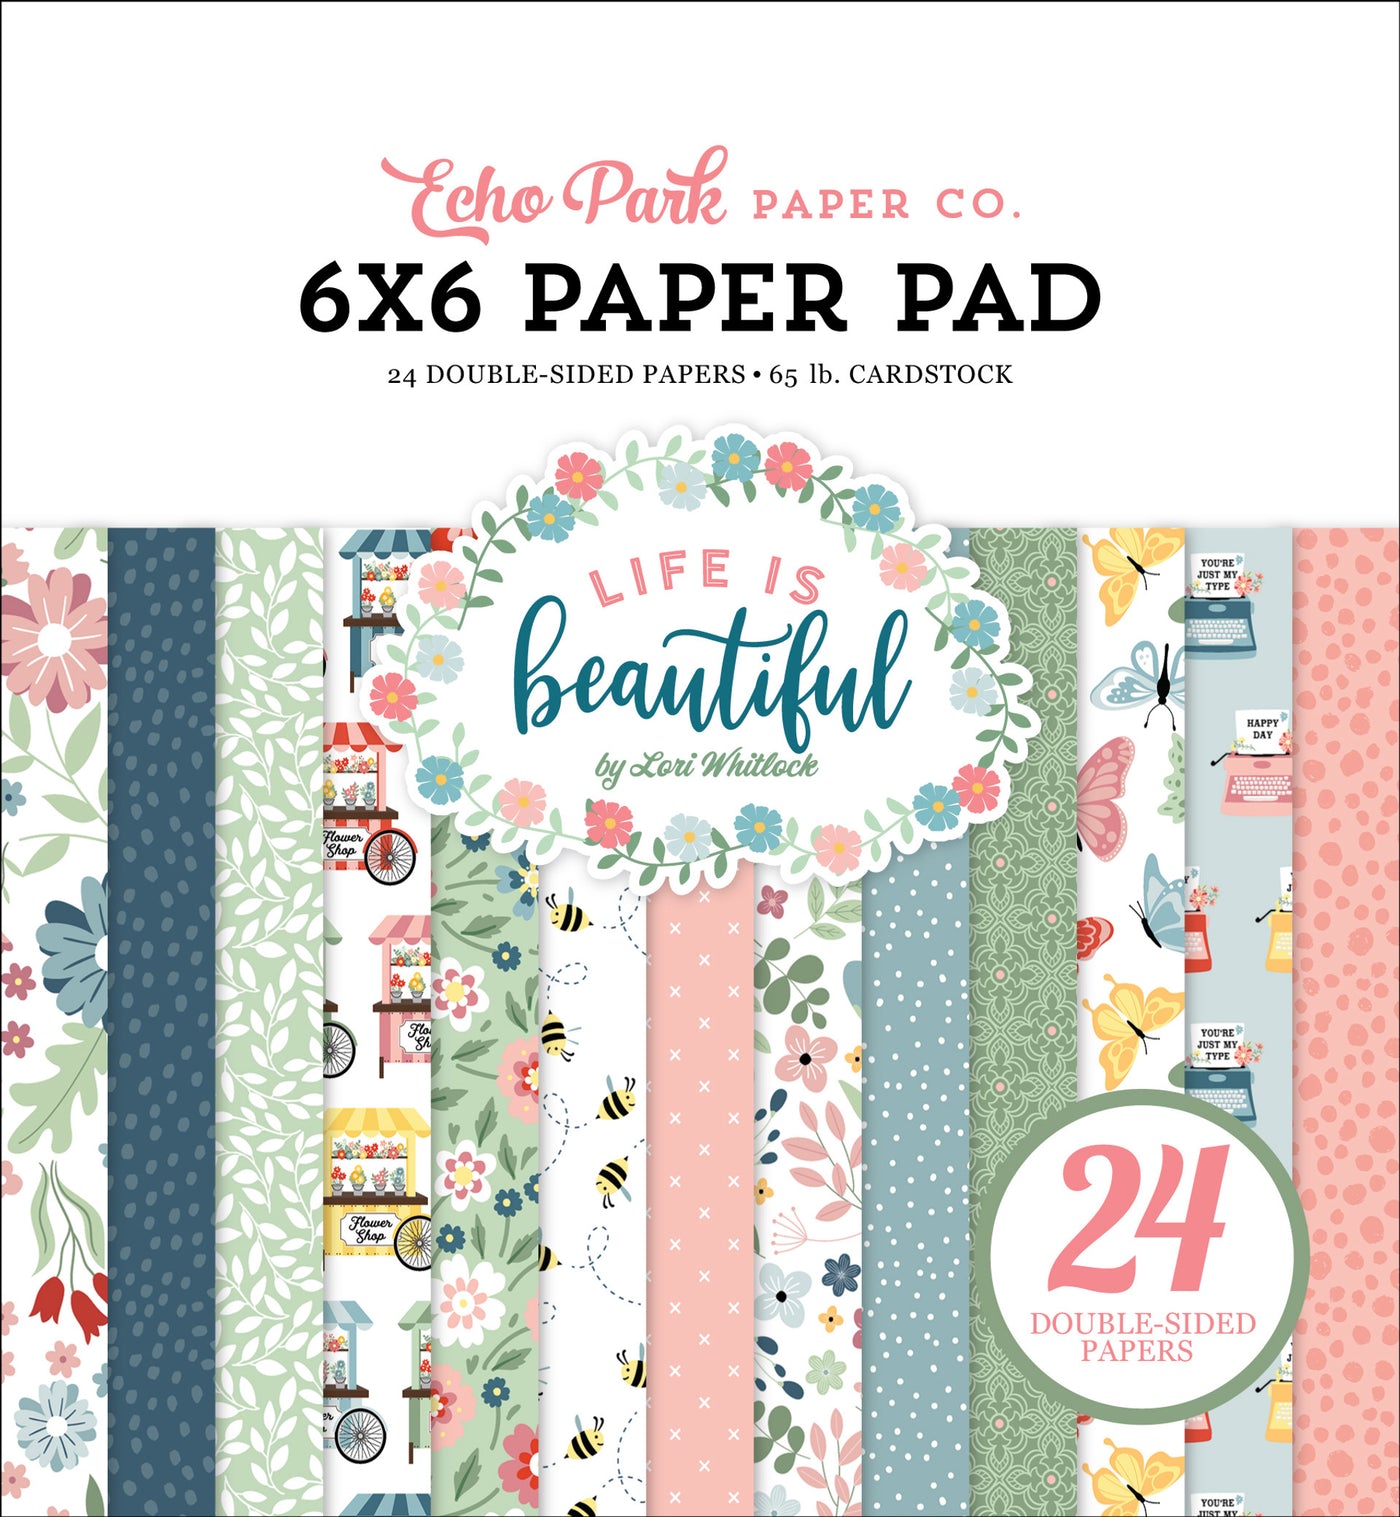 Tell your unique story with this 6x6 pad with 24 double-sided pages for cards and paper crafting. Printed pad coordinates with Life is Beautiful Collection Kit by Echo Park Paper.